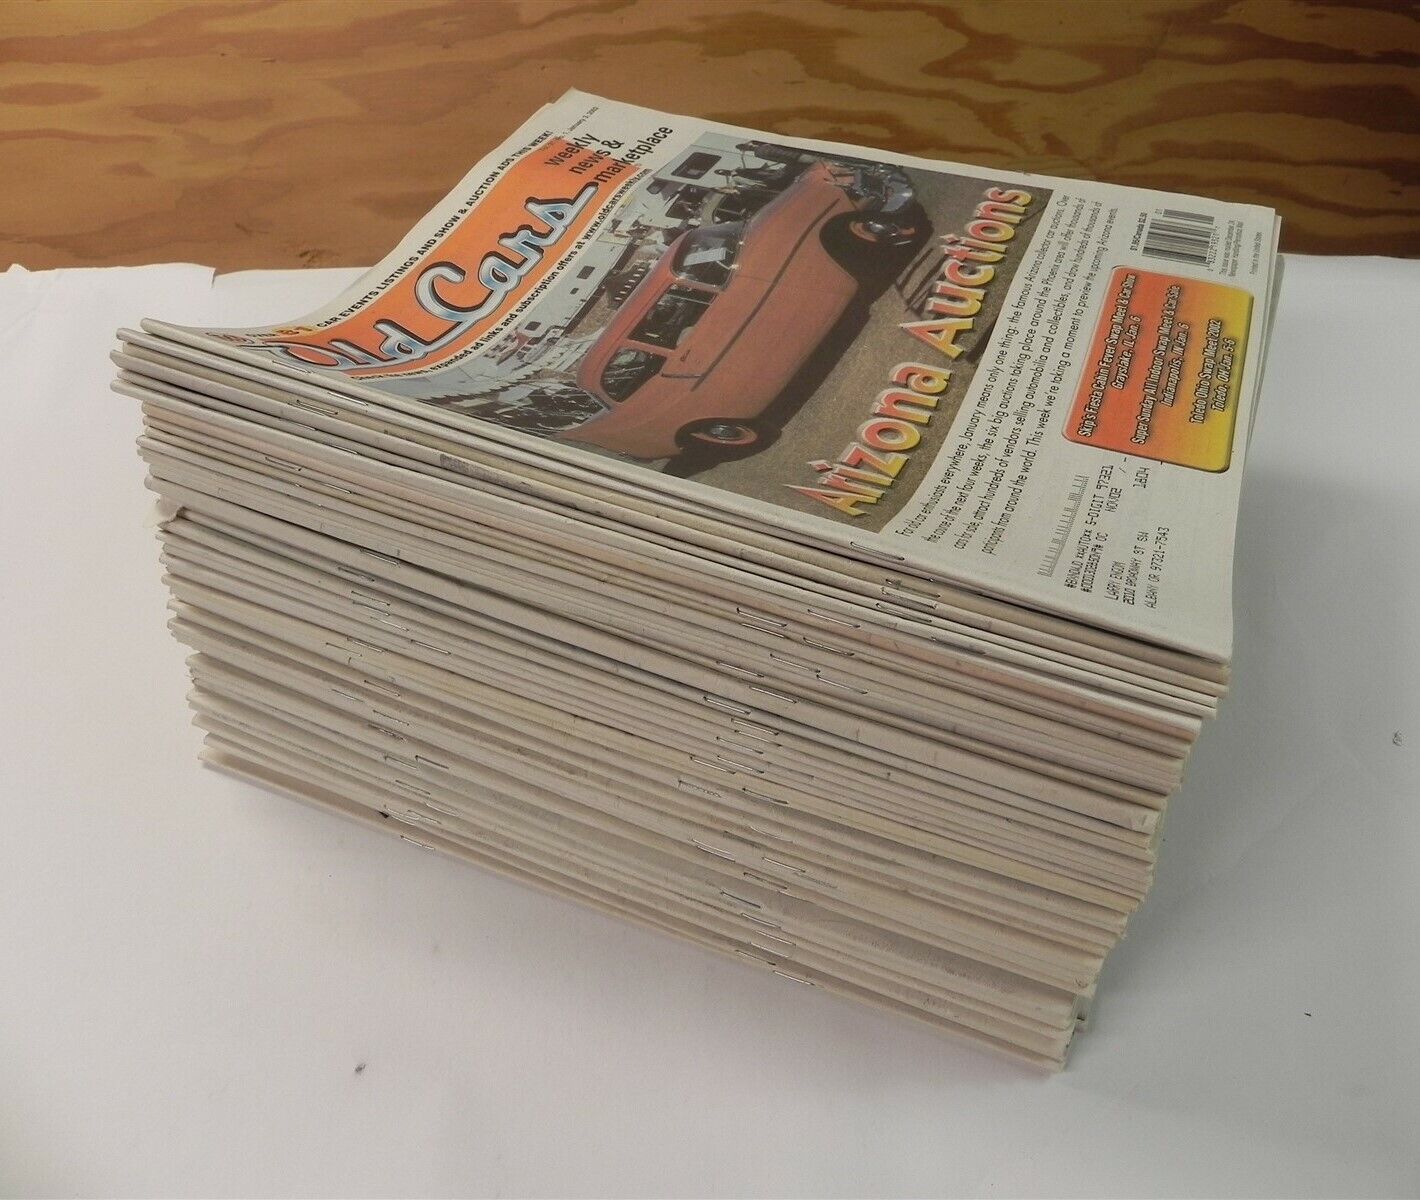 OLD CARS WEEKLY NEWSPAPER | 2002 *COMPLETE YEAR* -IN GOOD CONDITION- 